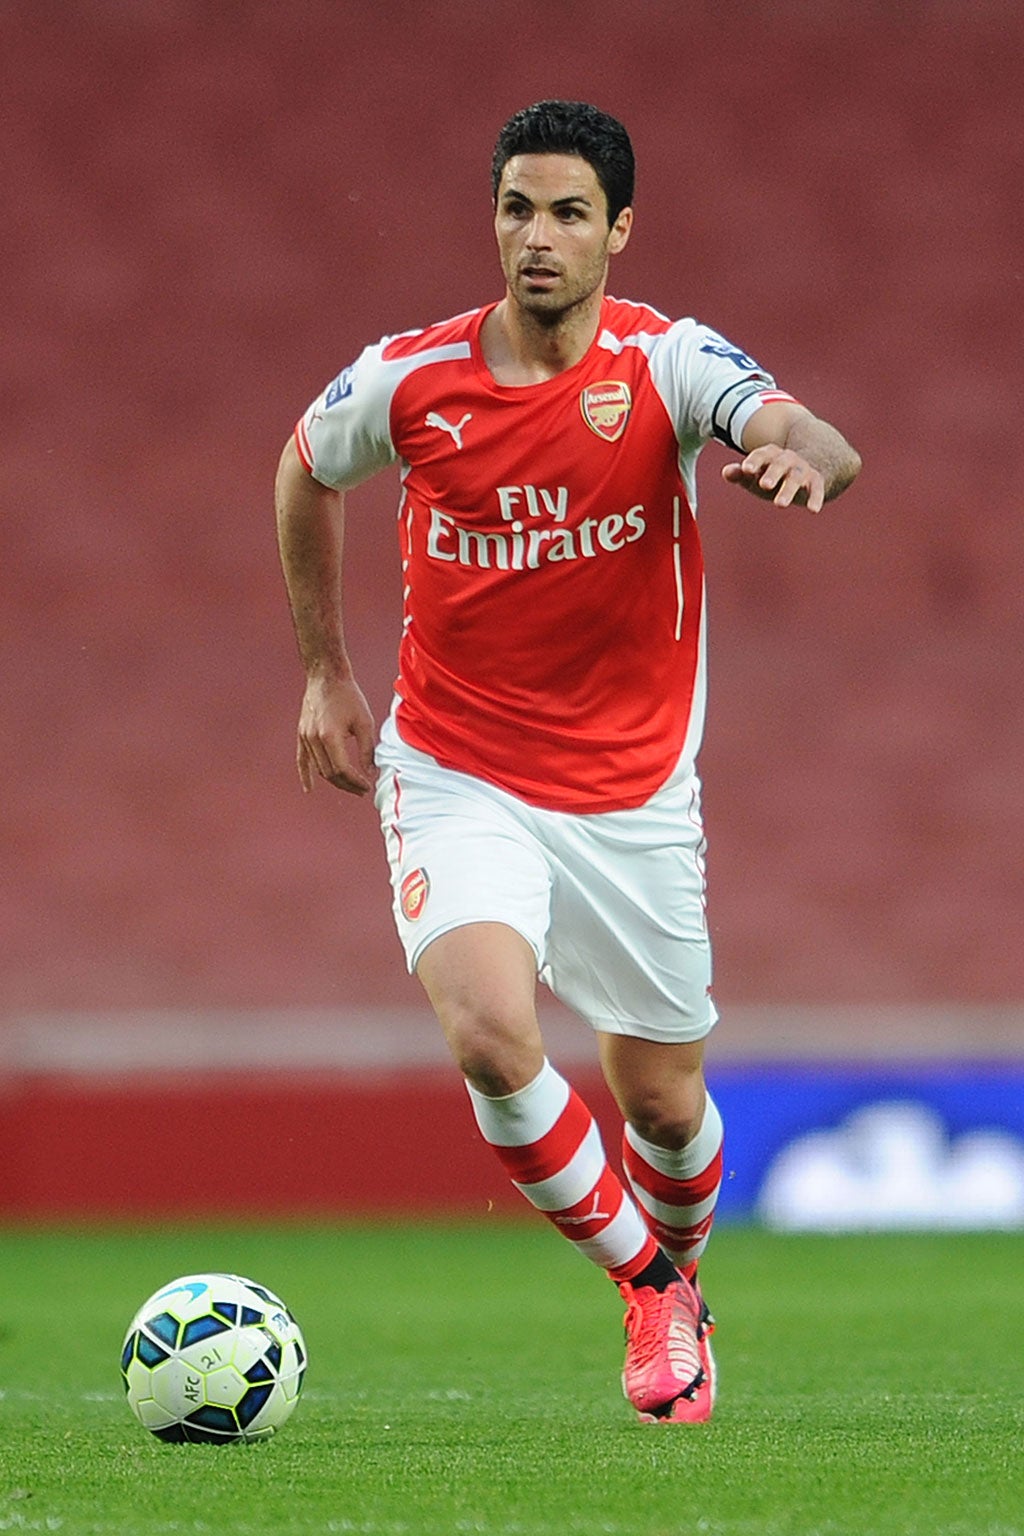 Mikel Arteta returned in an under-21s game earlier this month